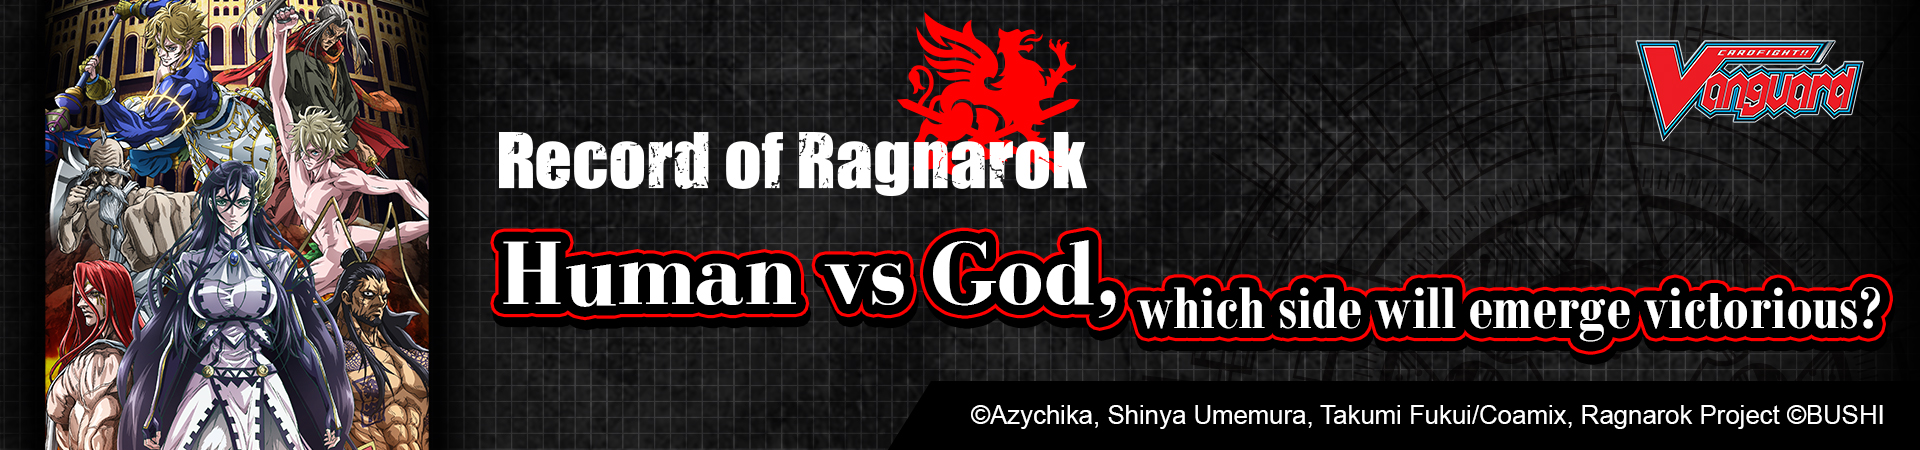 Record of Ragnarok: Human vs God, which side will emerge victorious?